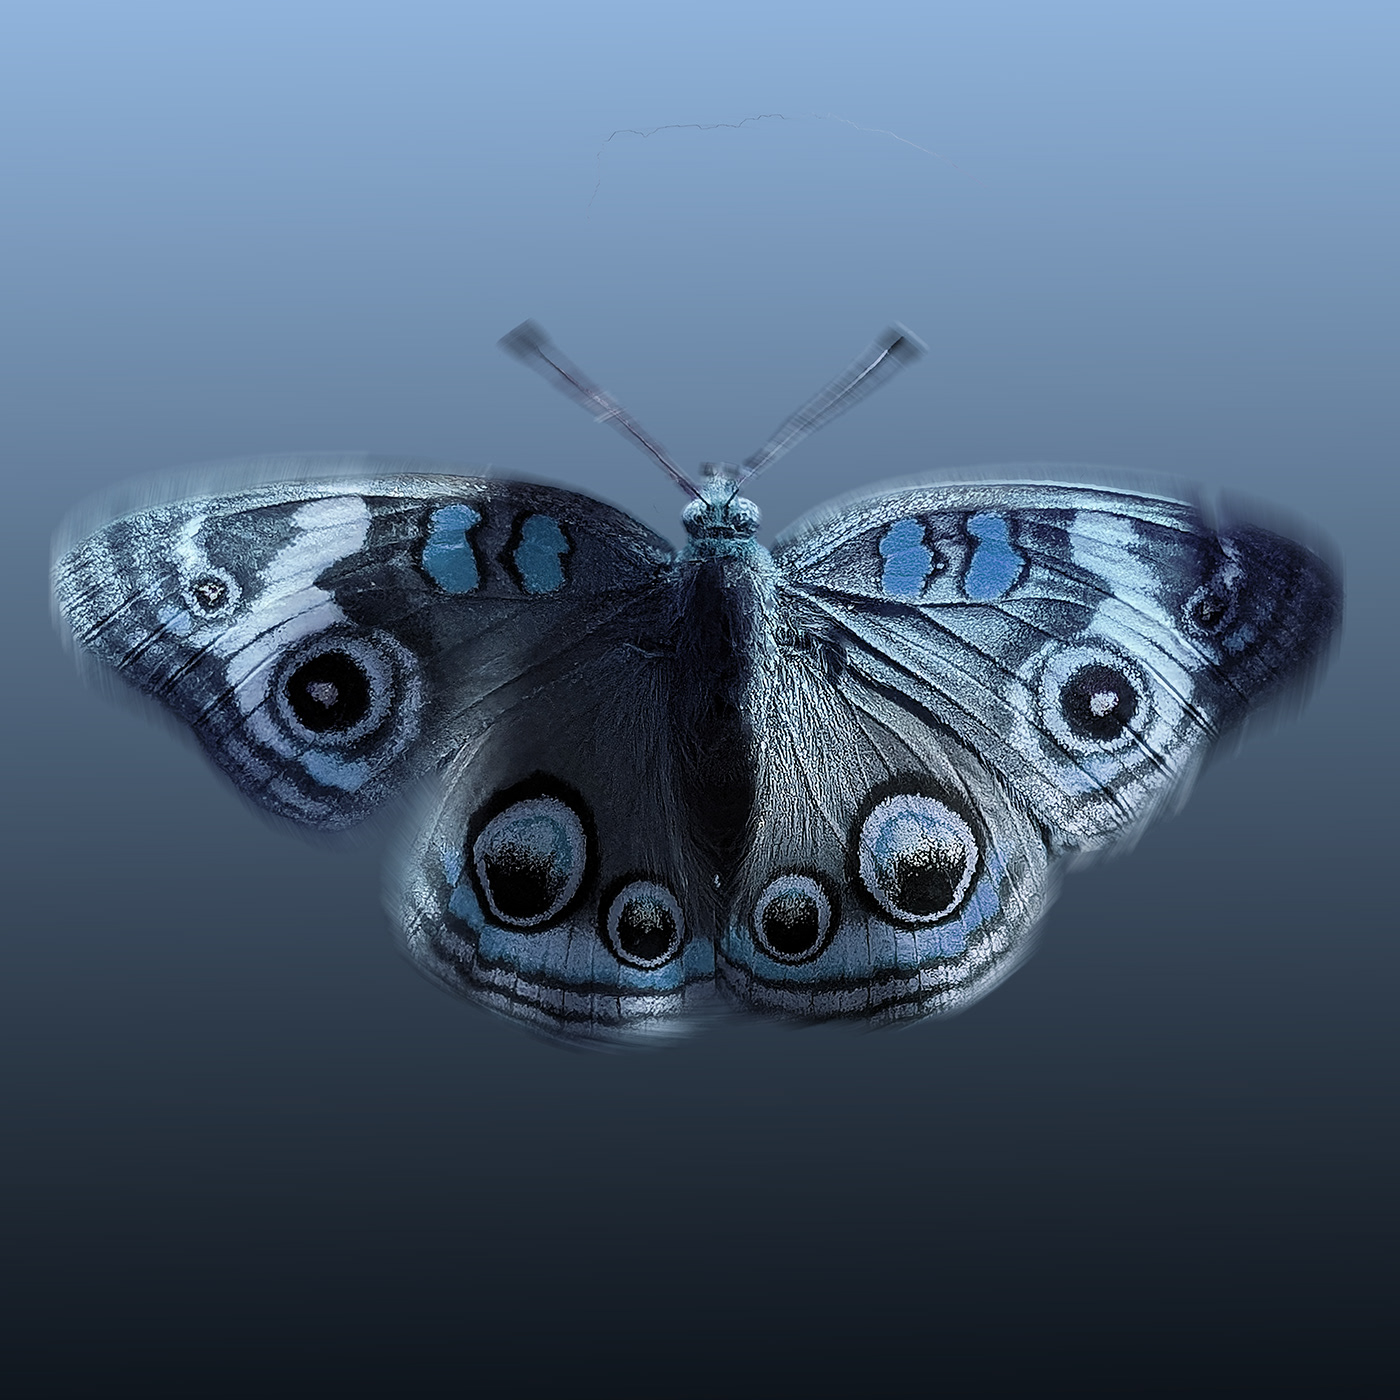 shelby hanlon photographer butterfly eclipse moon Nature insect Photography  photoshop Macro Photography